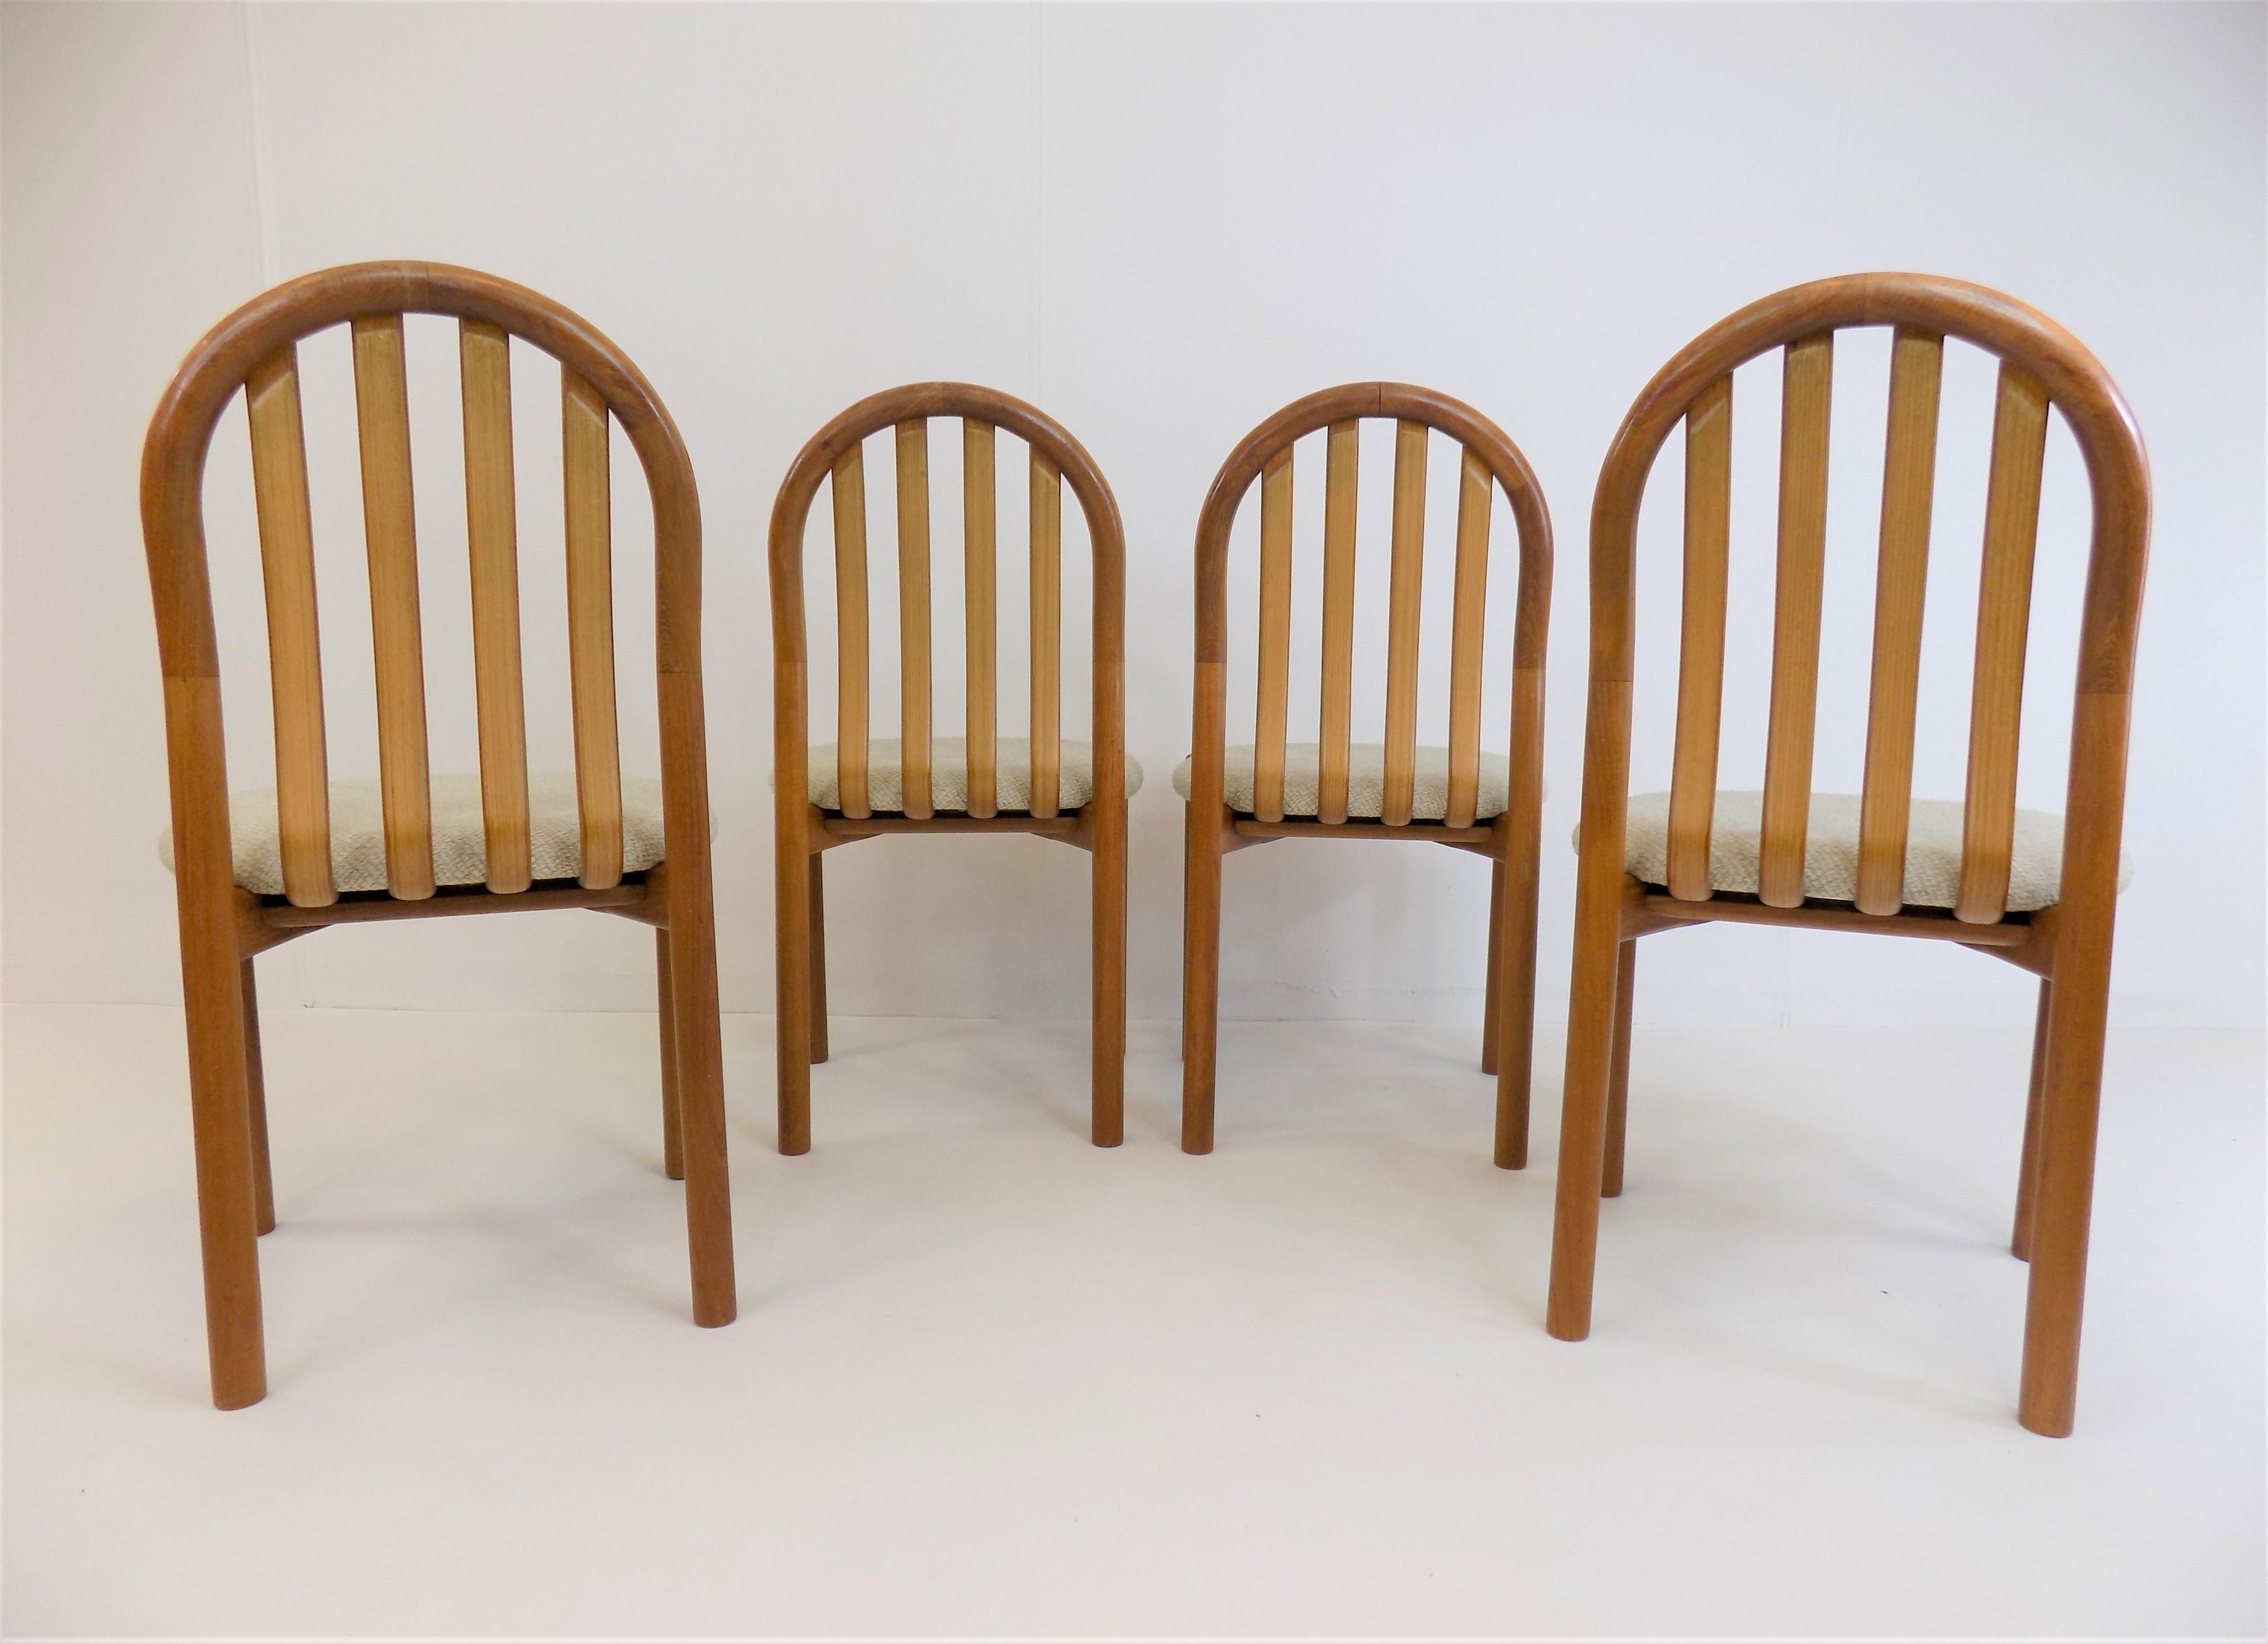 The 4 Koefoeds dining chairs are made from a wonderfully solid teak and are in near mint condition. The teak frames show hardly any signs of wear and have a very attractive, warm color which harmonises beautifully with the ivory-colored fabric cover